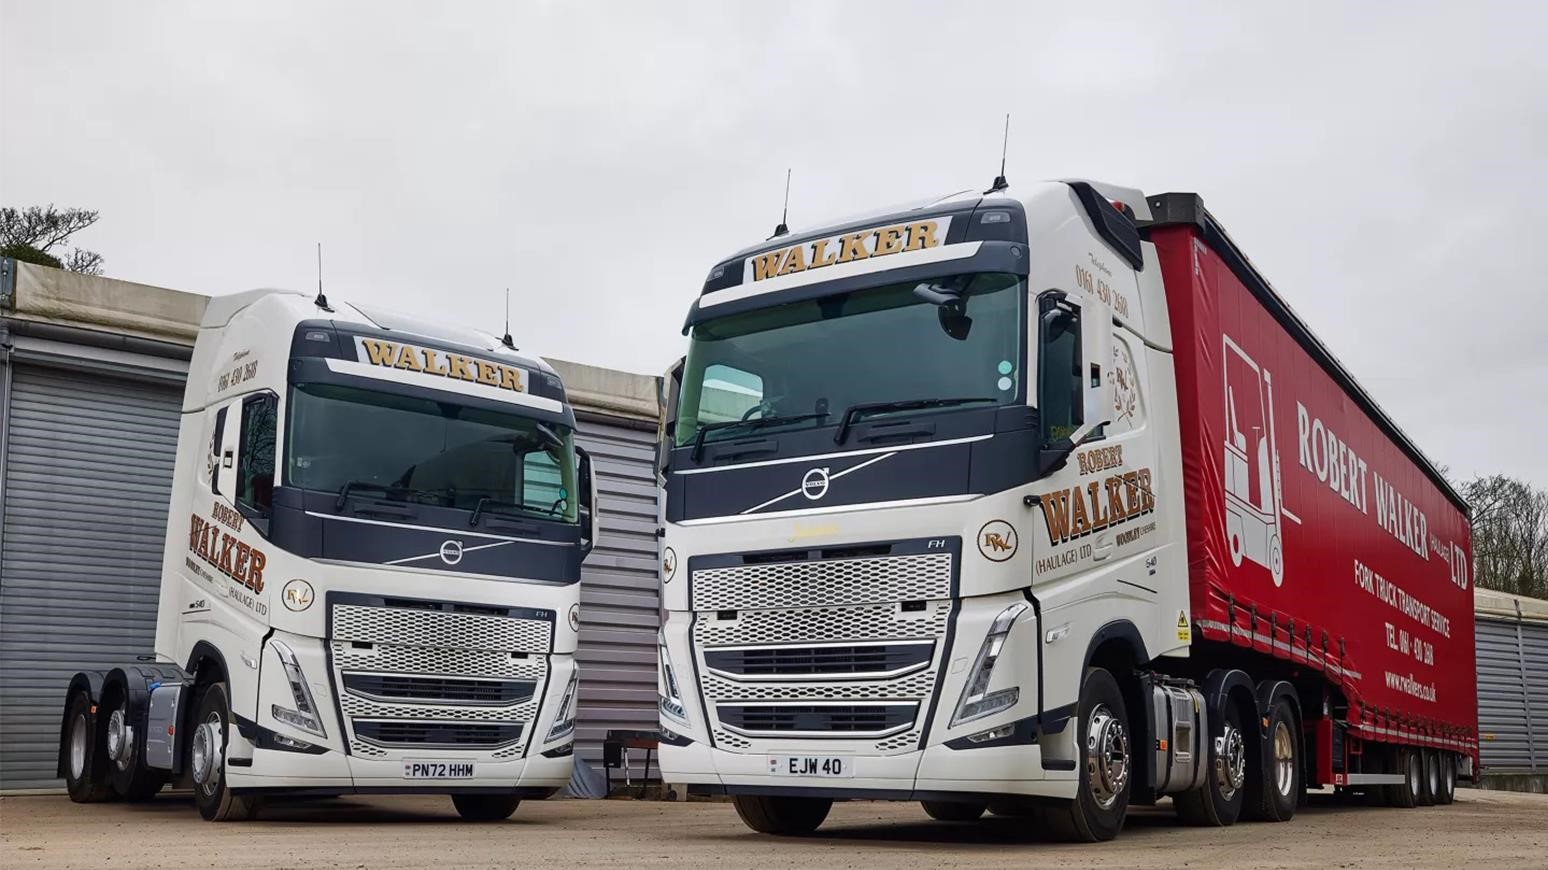 Robert Walker Haulage Specified New Volvo FH 540 6x2 Trucks For Driver Comfort